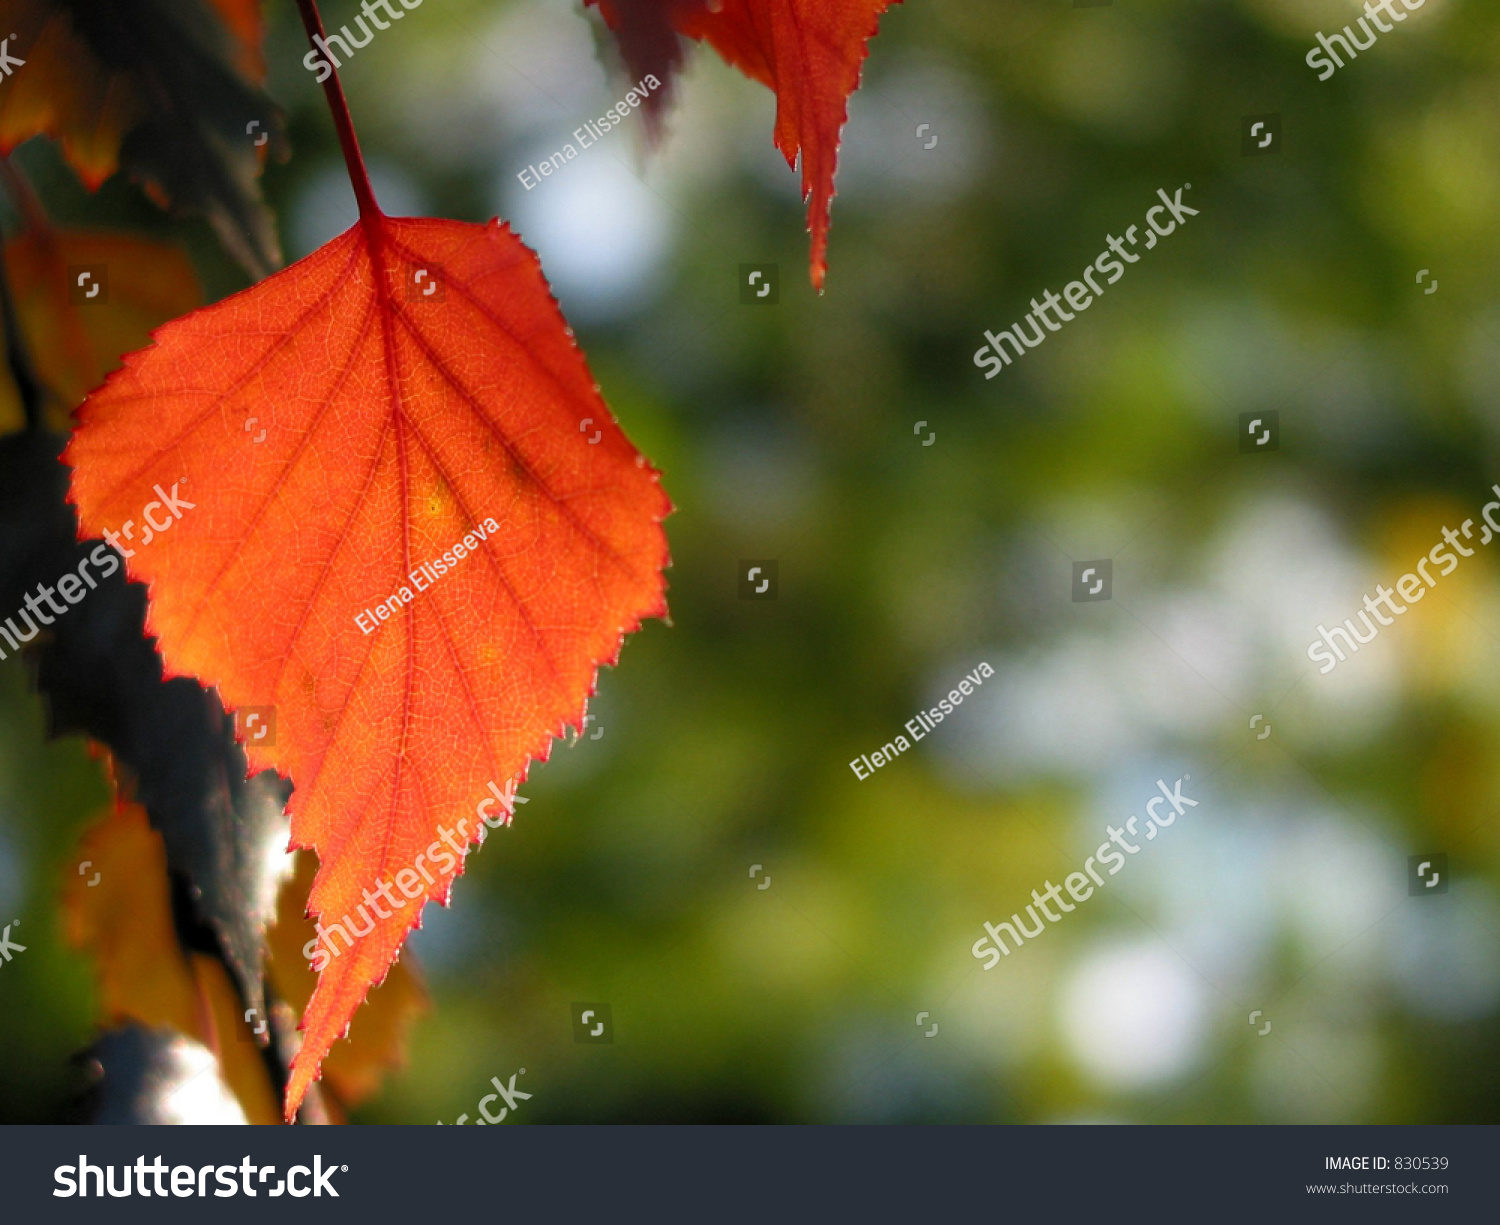 Closeup on isolated red autumn leaf with open space for text #830539